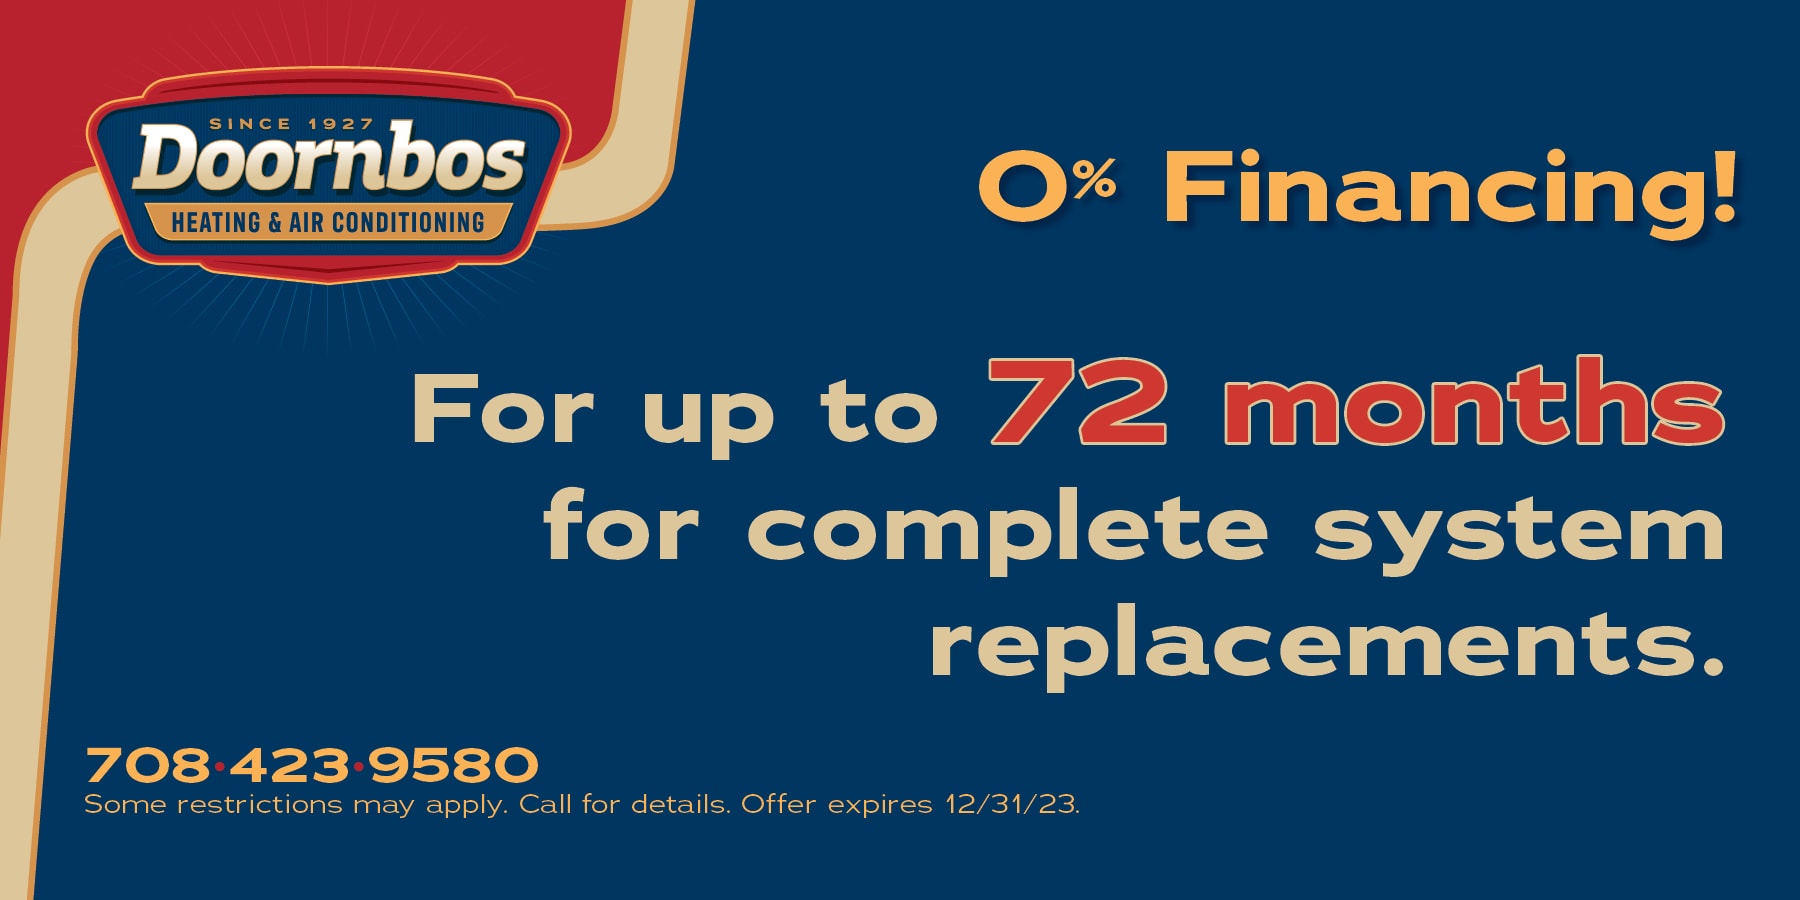 0% Financing for up to 72 months for complete system replacements.